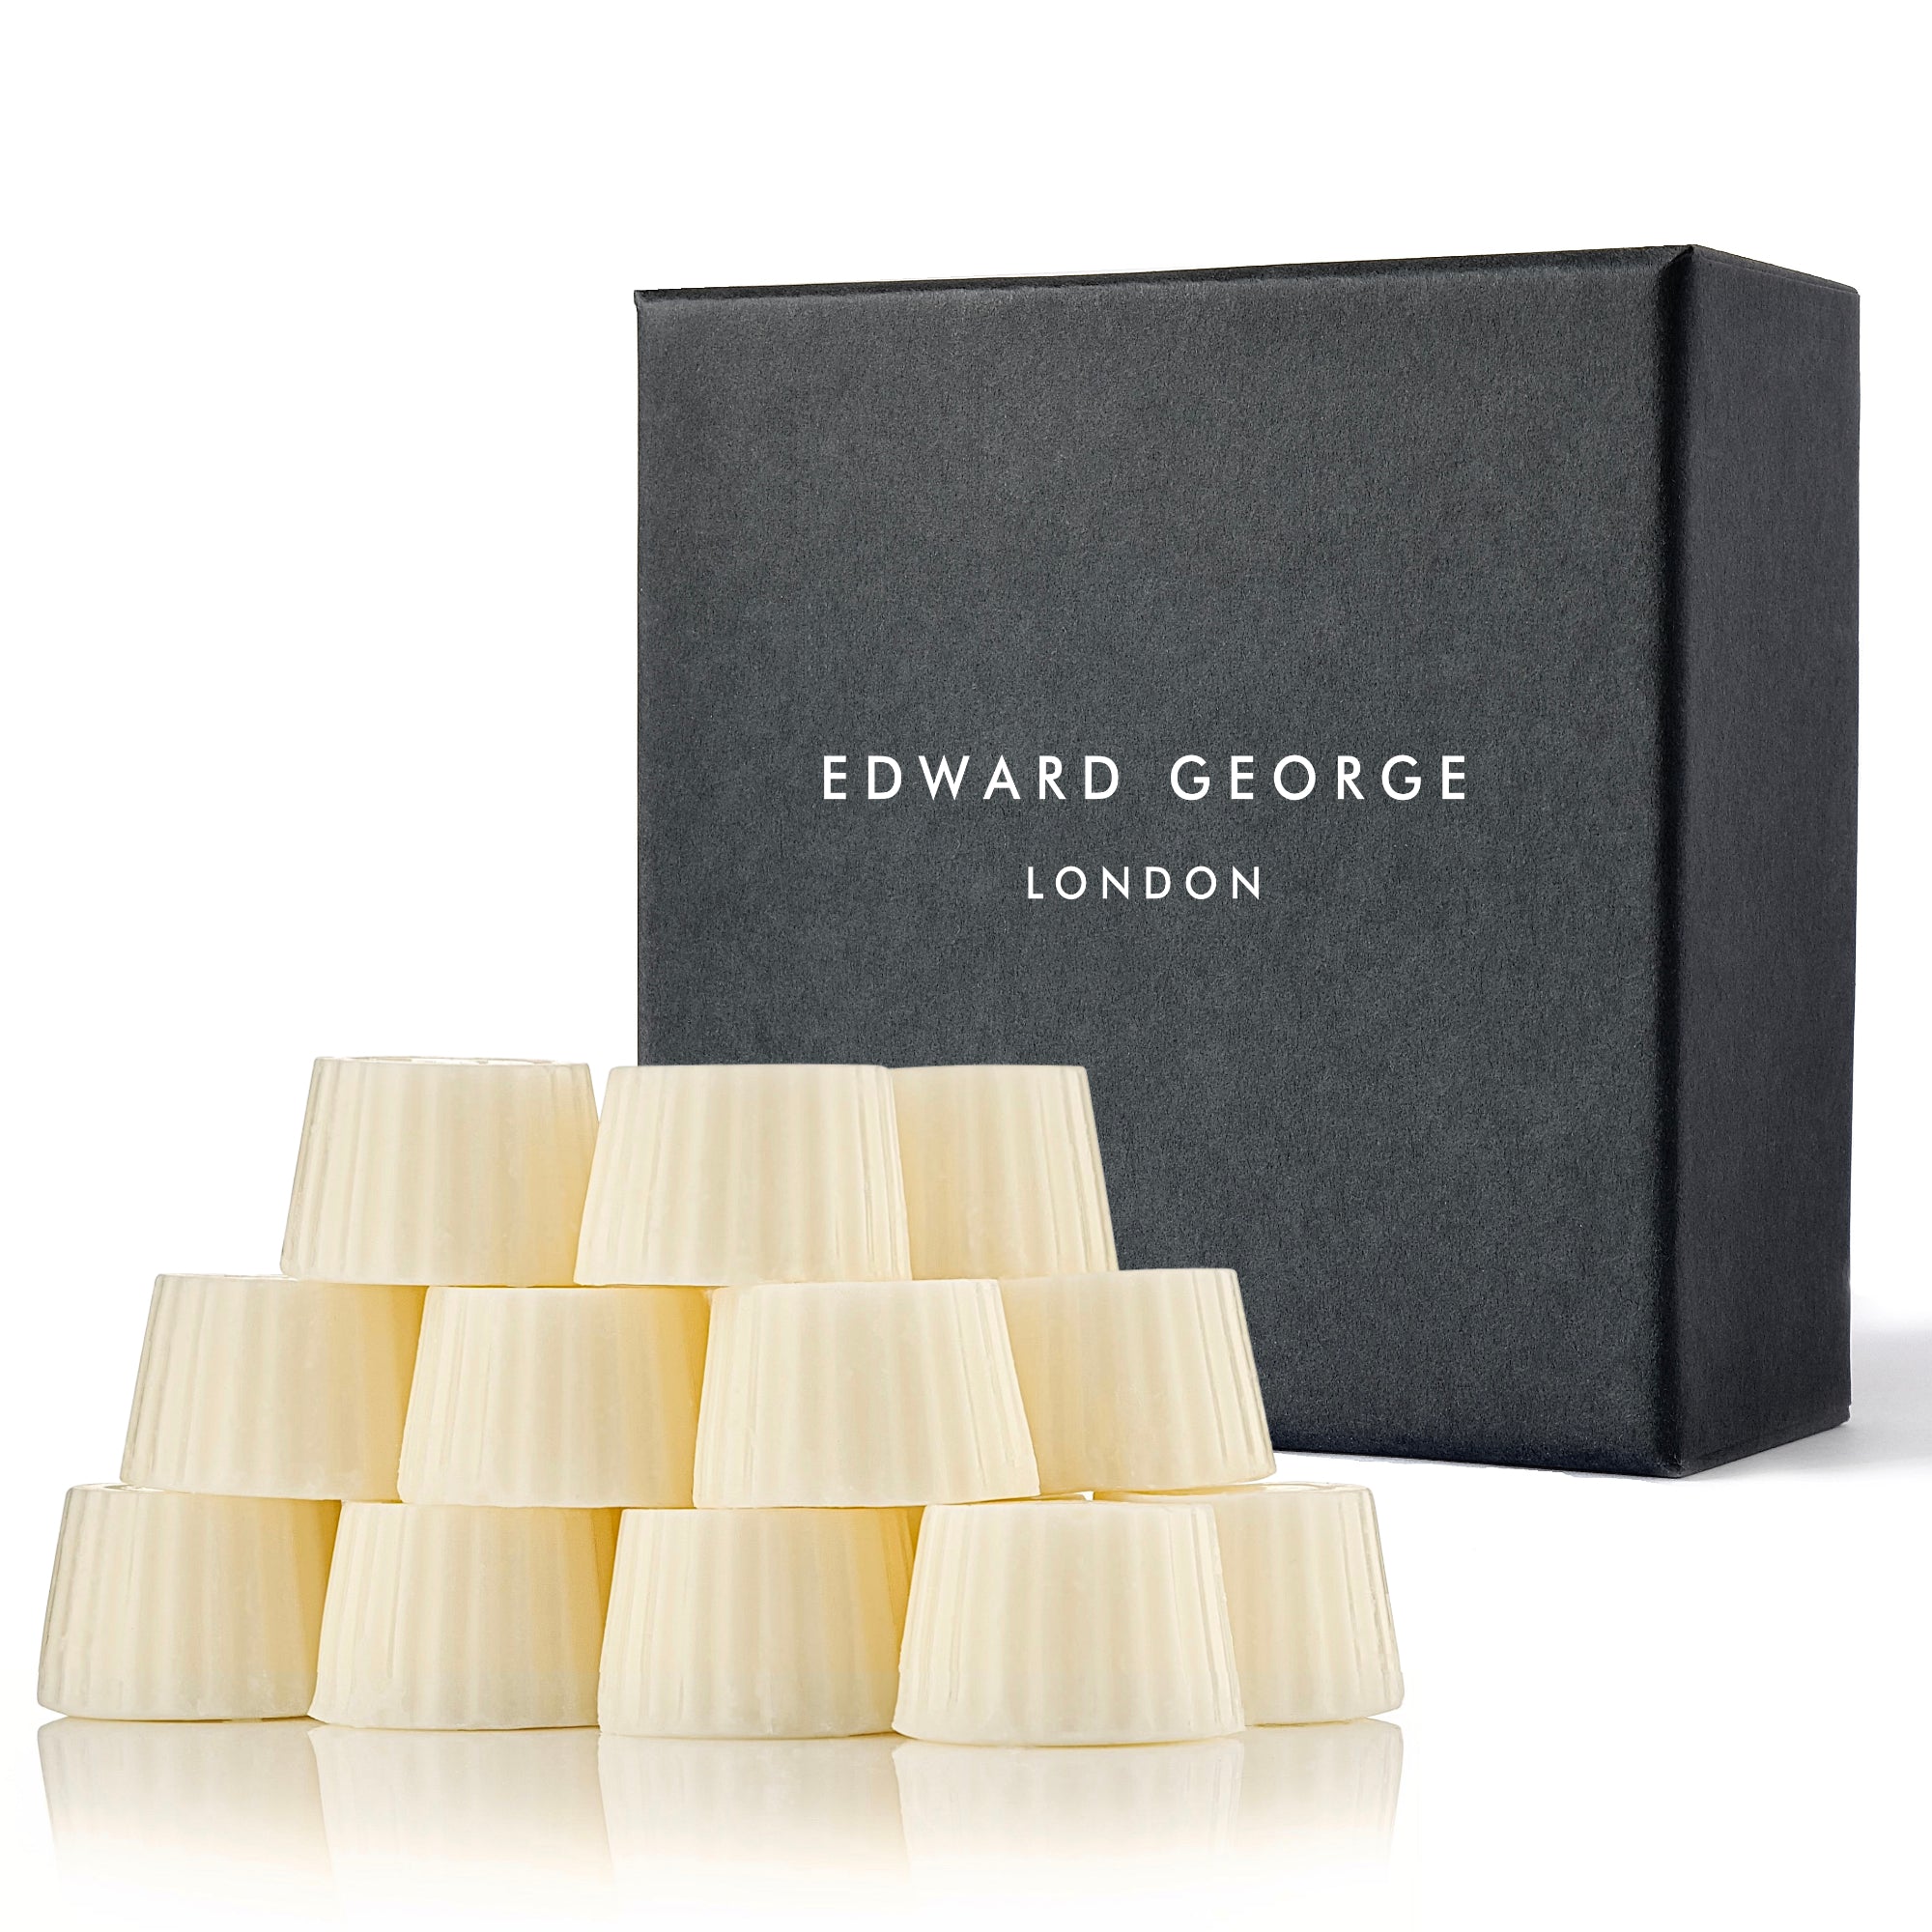 wax melts melt home fragrance decor room edward george london luxury gift ritual scented england scent oil women men black